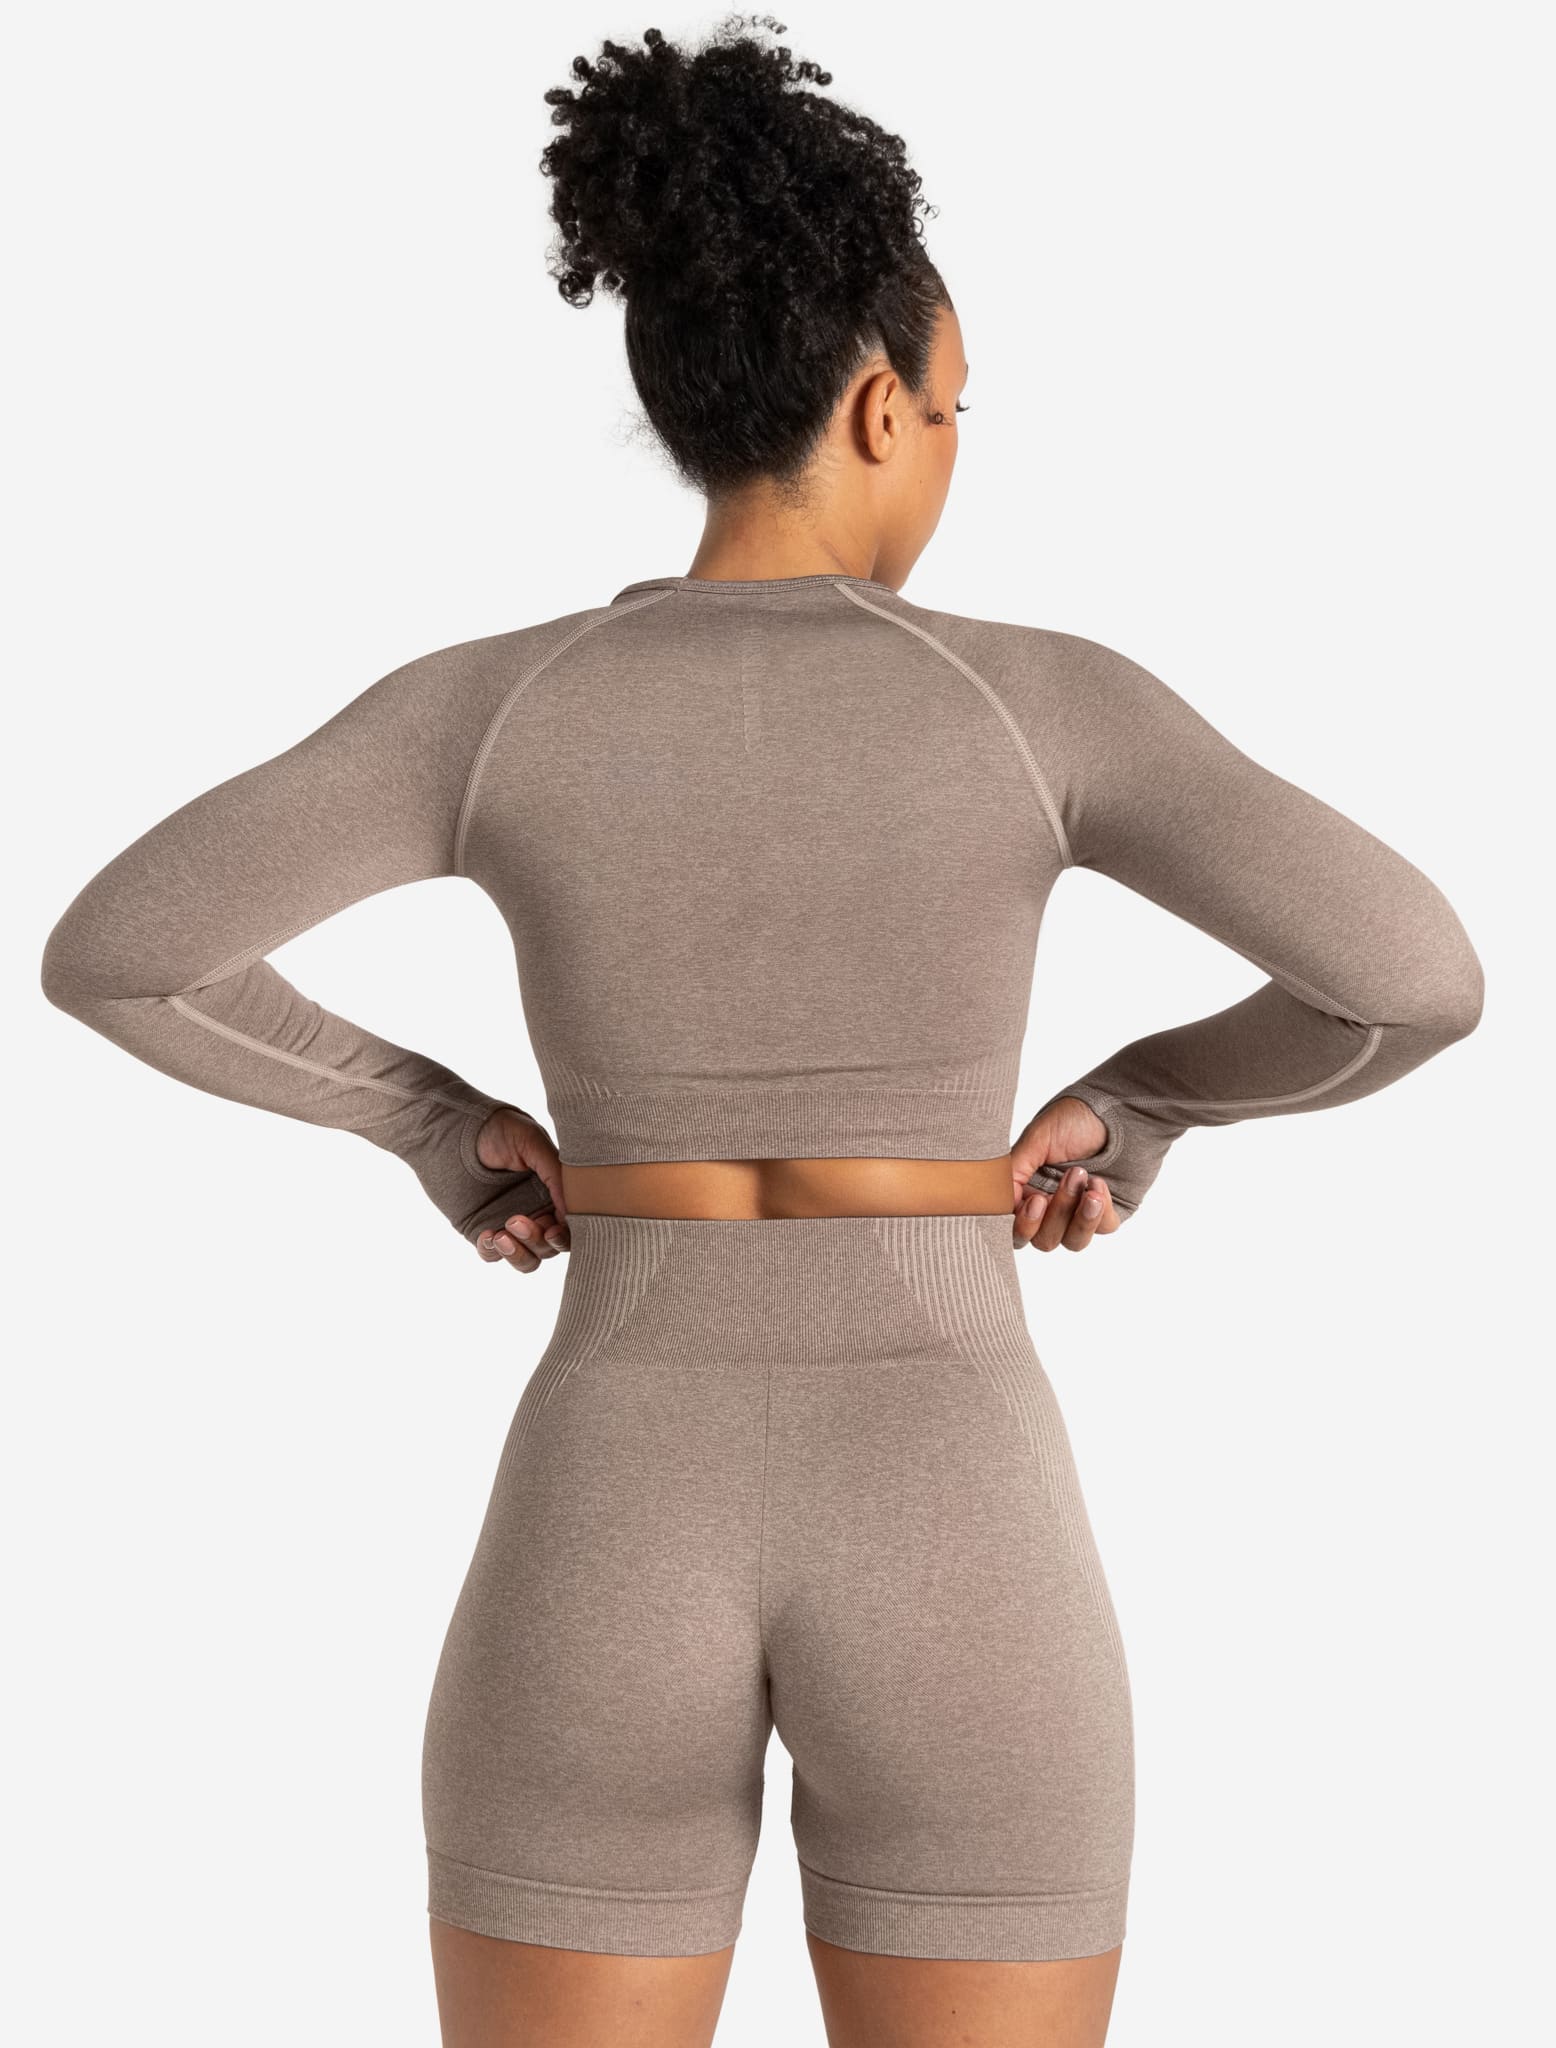 ADAPT 2.0 Seamless Crop Top - Fawn Pursue Fitness 2